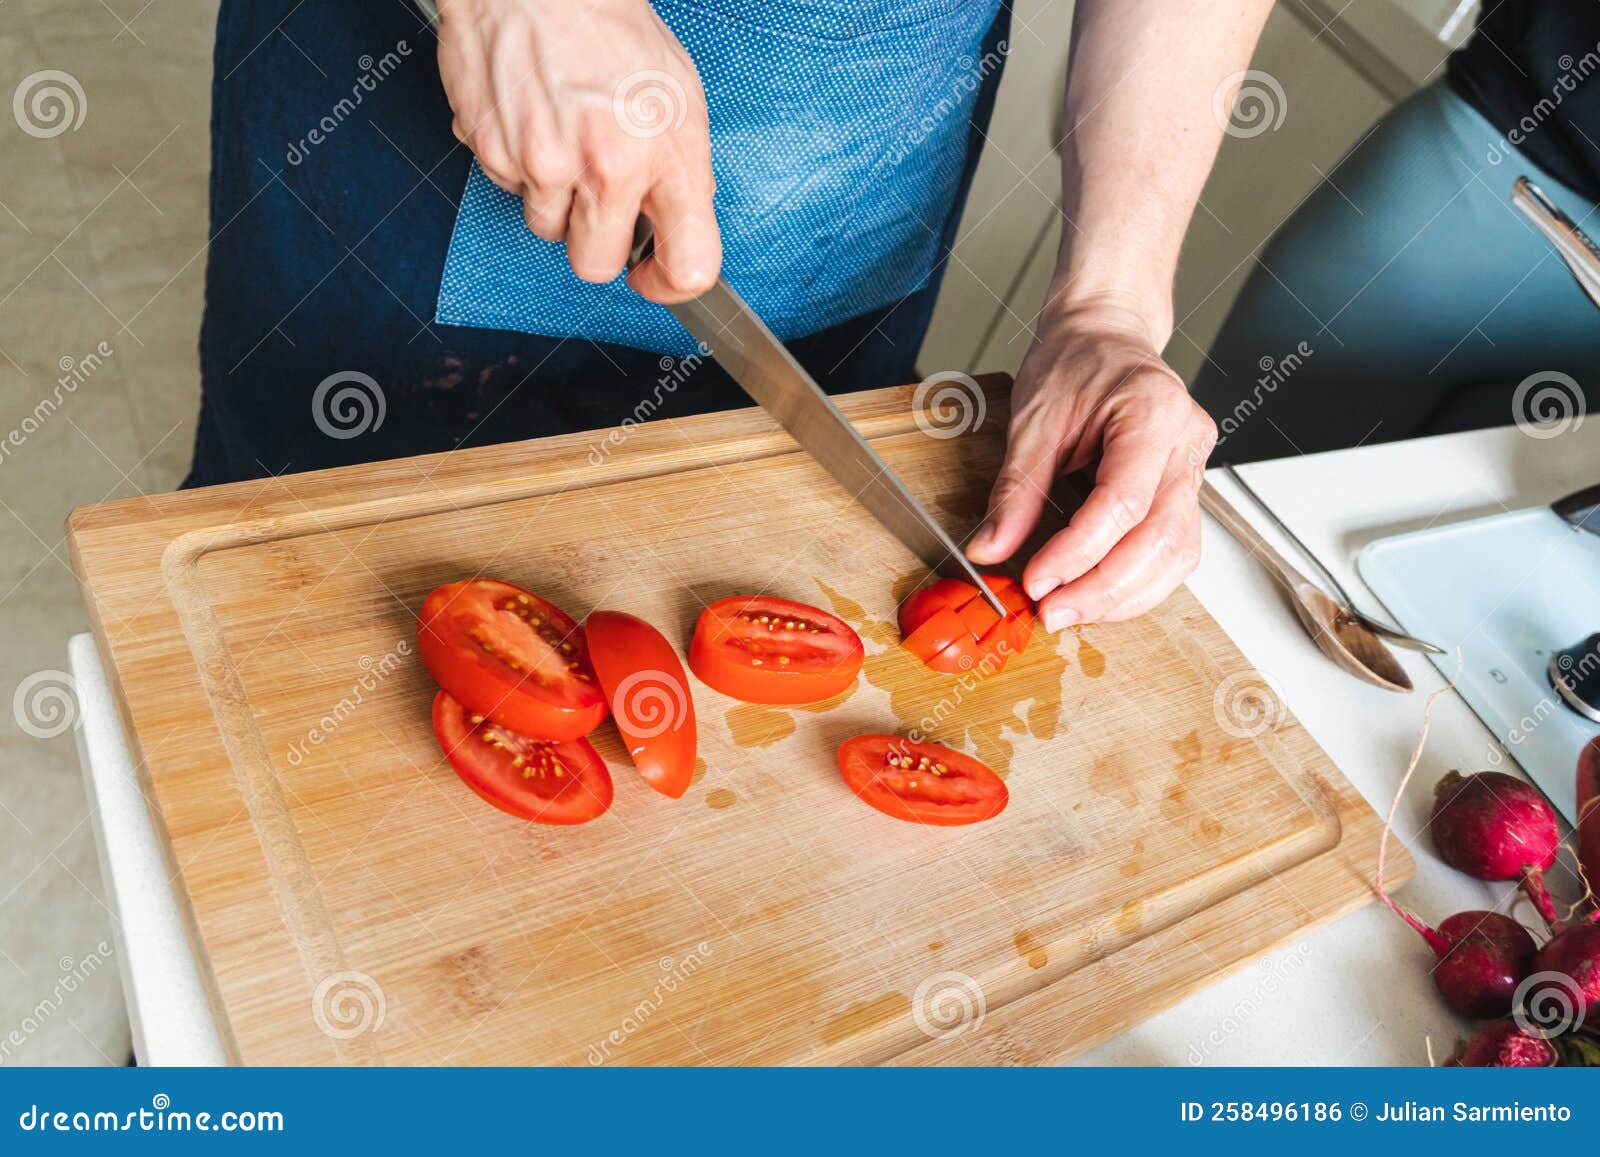 person chopping vegetables, to make a salad and getting food ready to cook